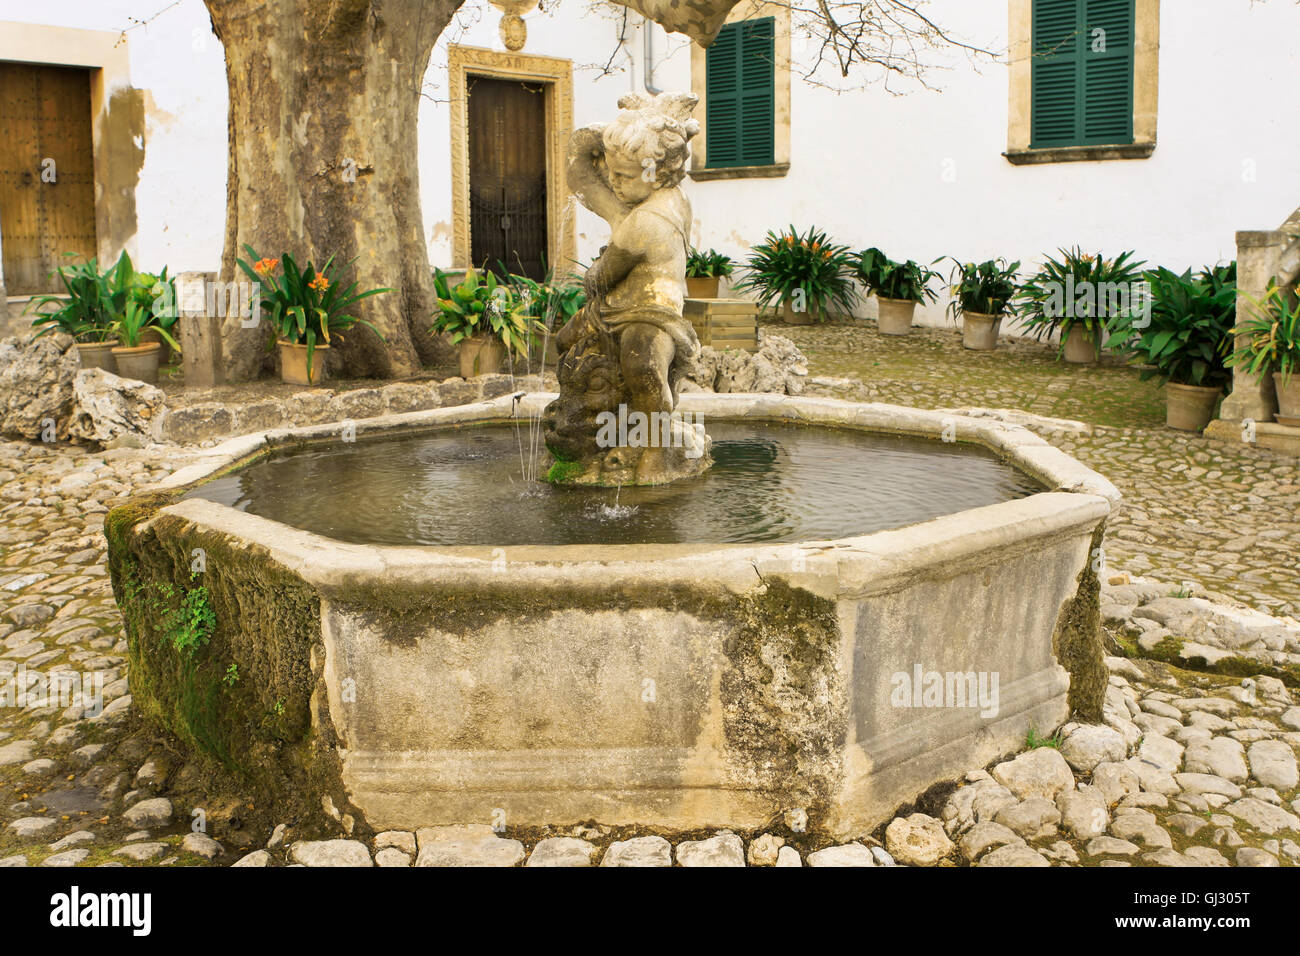 Water fountain in a court yard Stock Photo